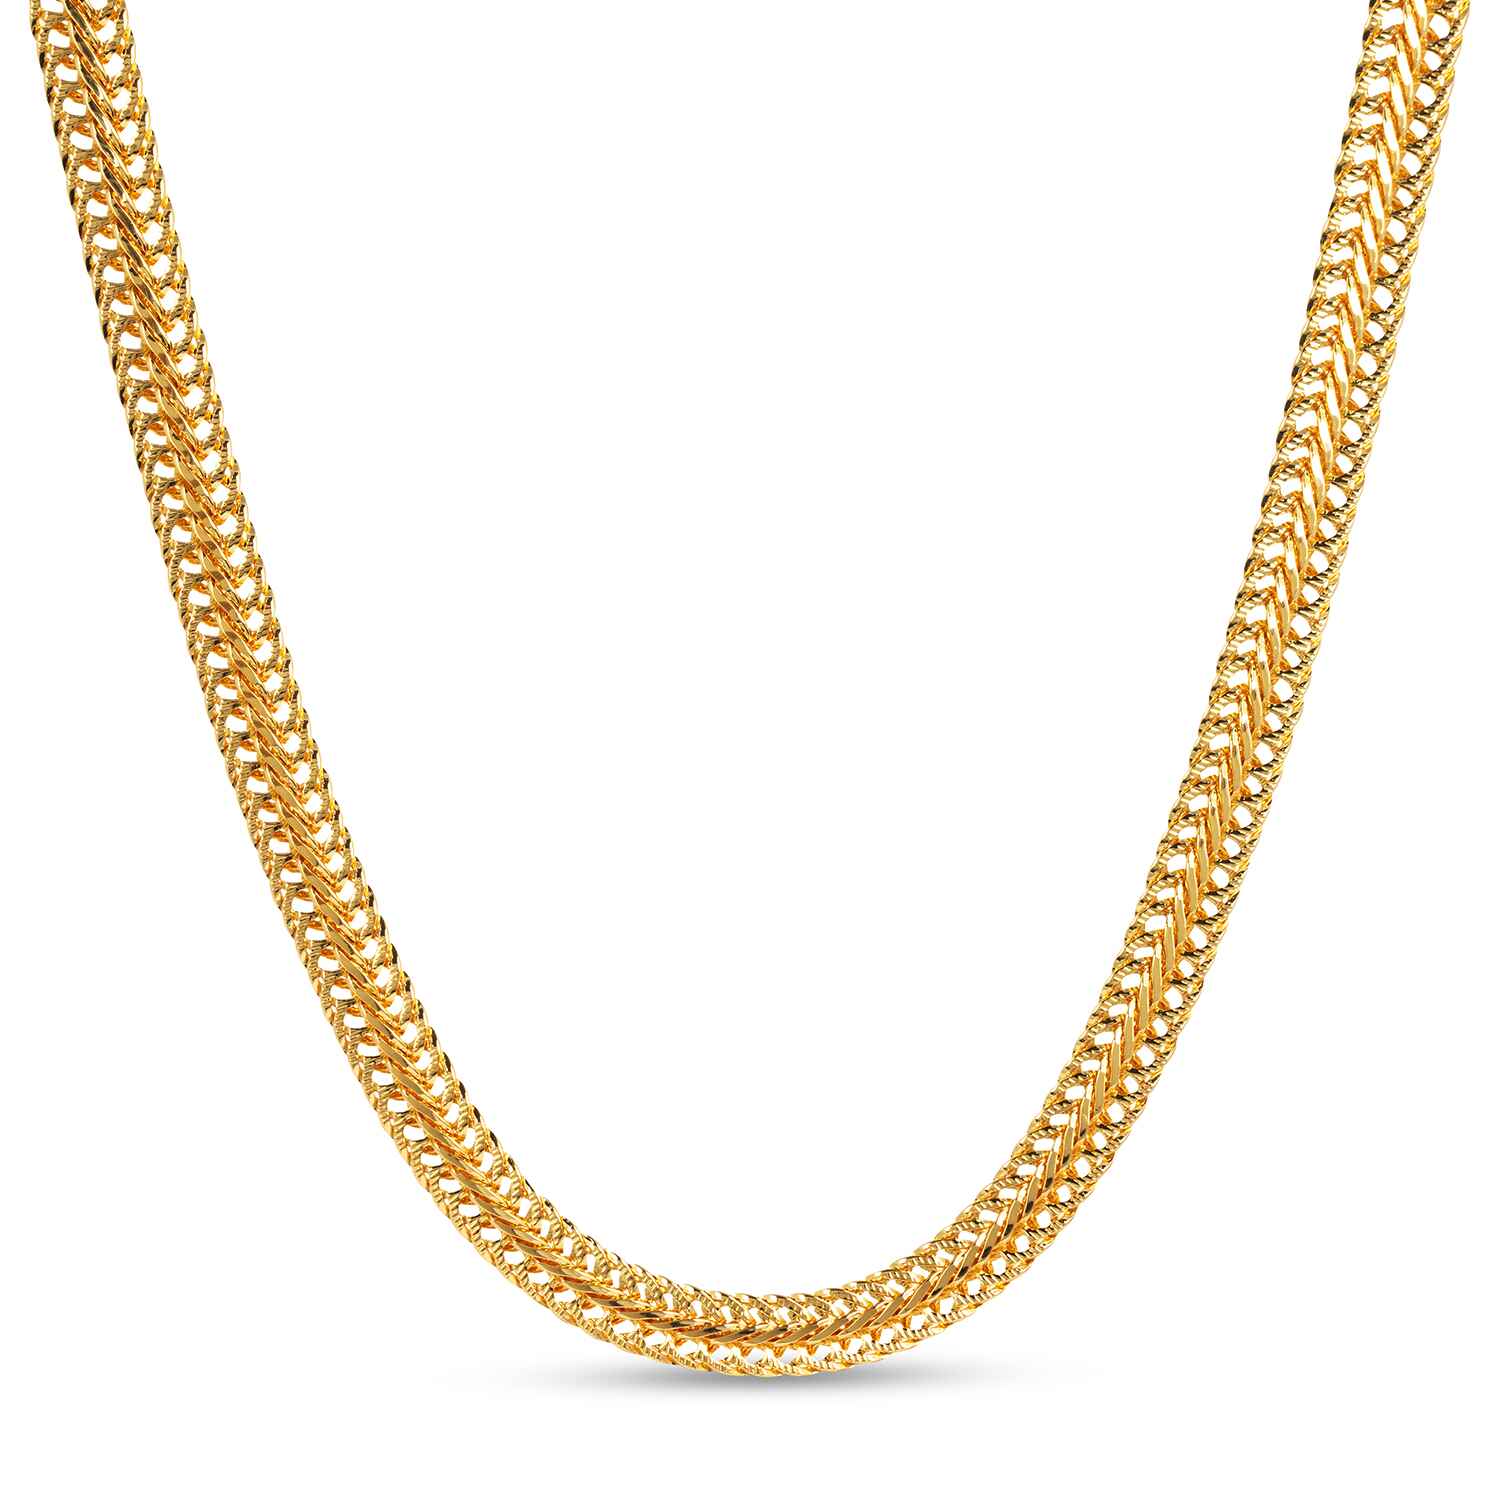 The vintage inspired Anna Snake Chain Gold Necklace is a modern classic that sits flat on the neck and is the ideal for layering.